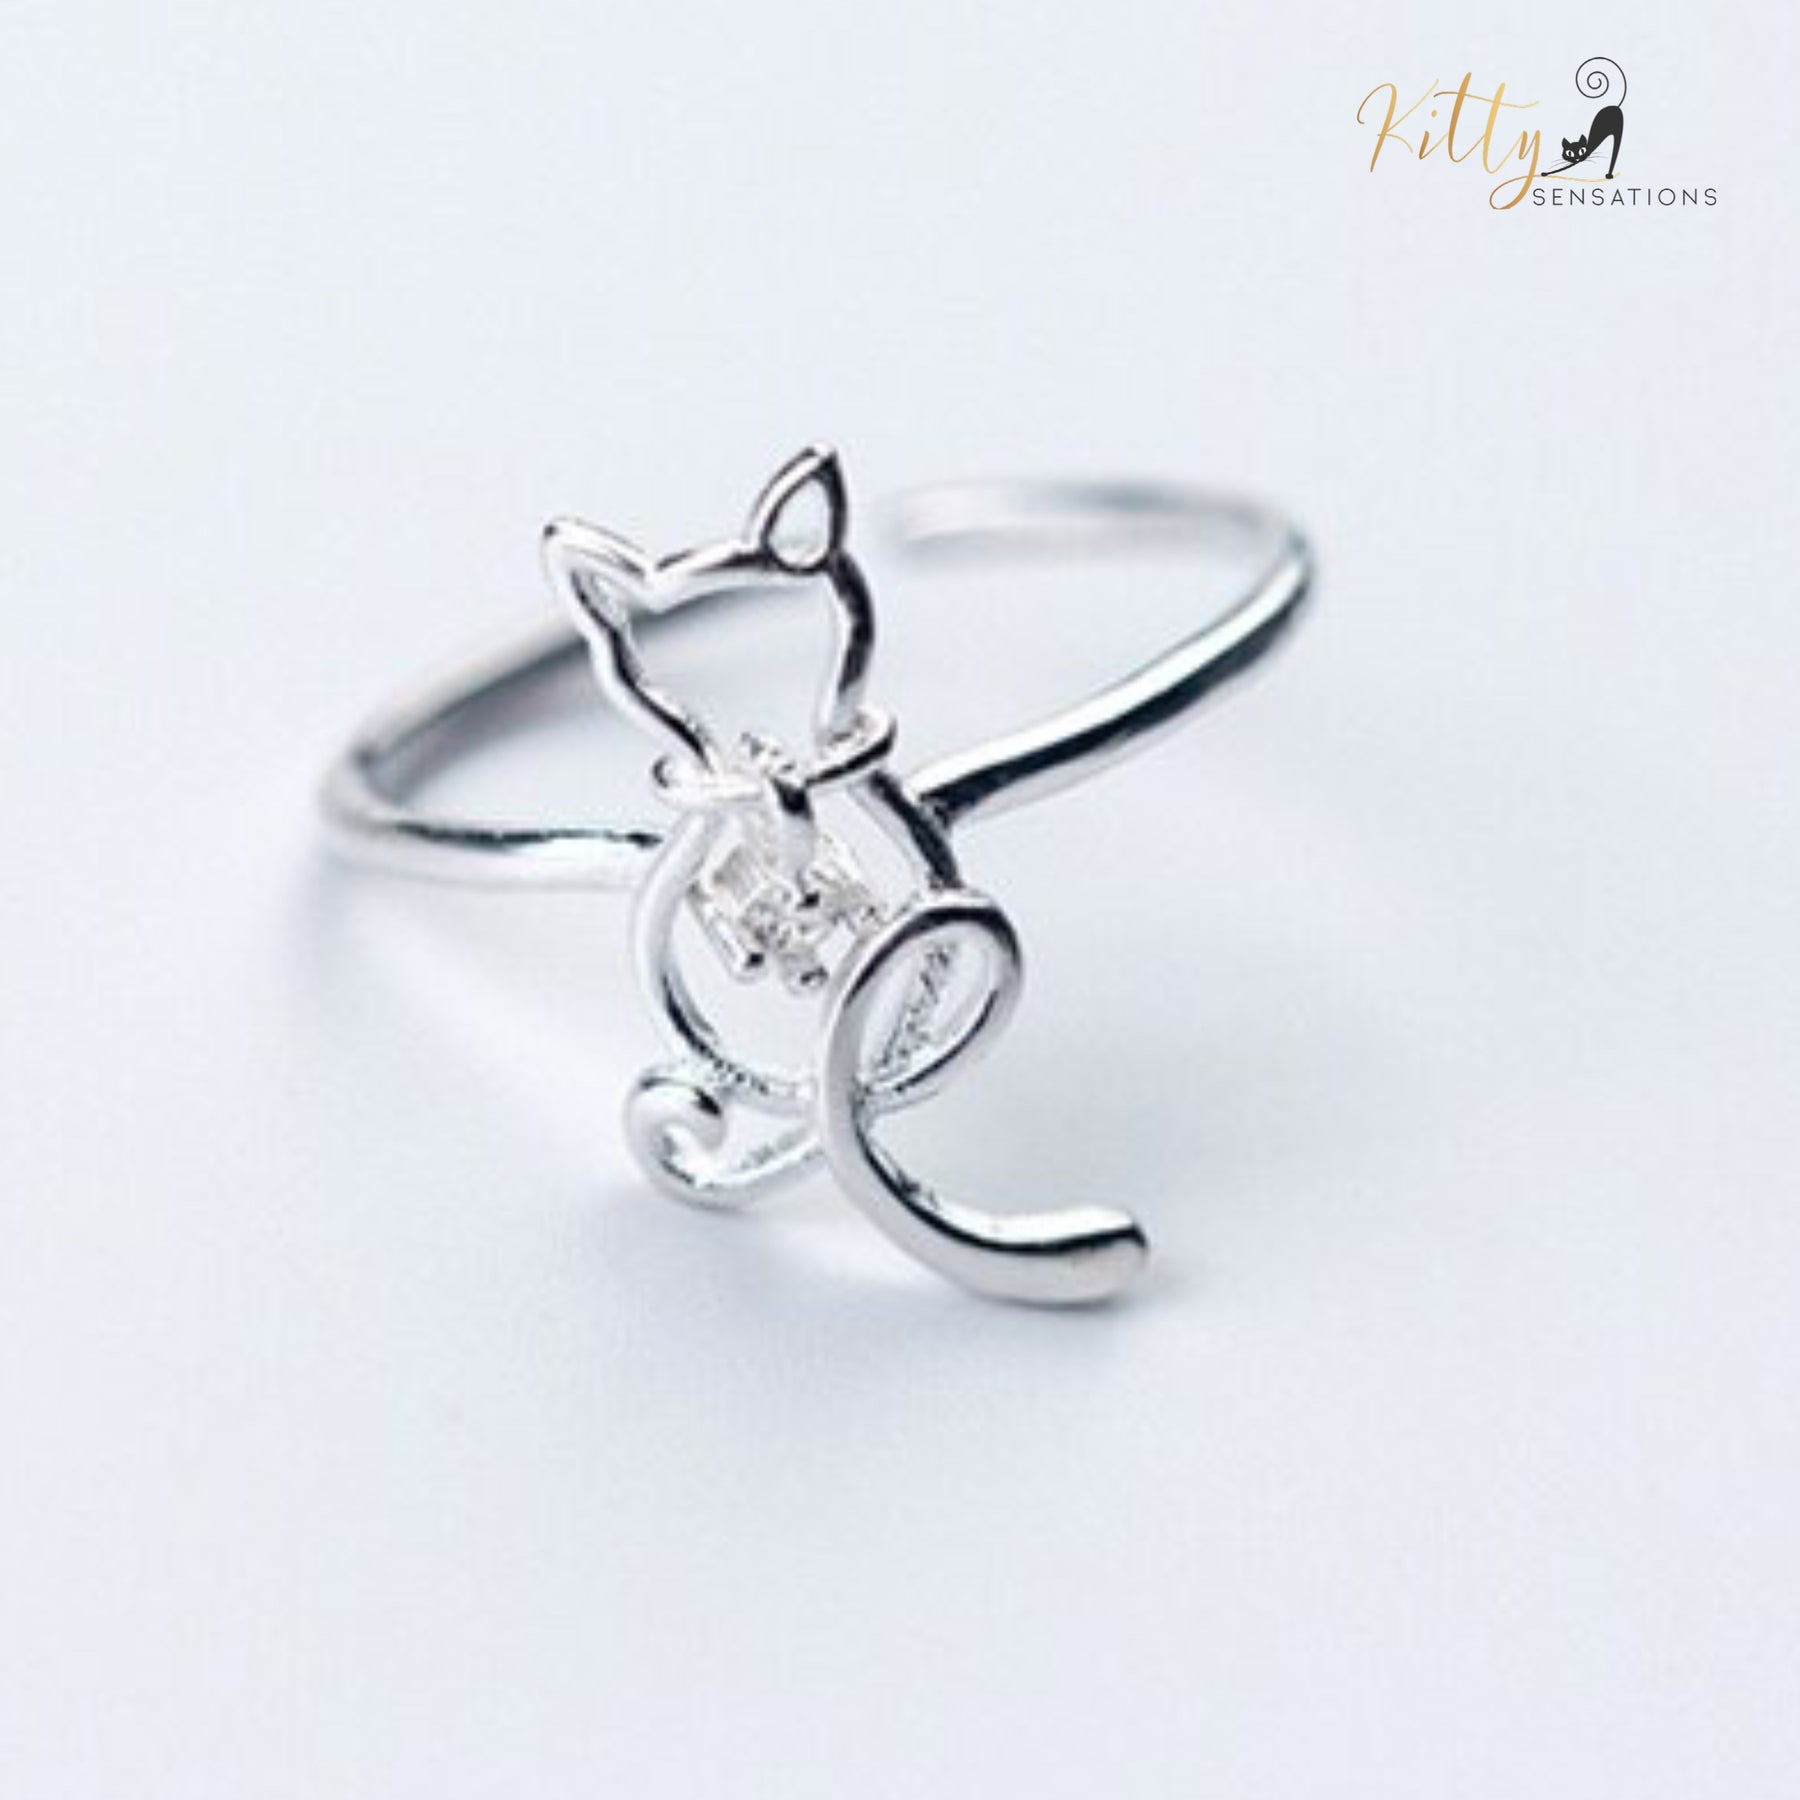 Zircon Heart Cat Ring in Solid 925 Sterling Silver - Adjustable